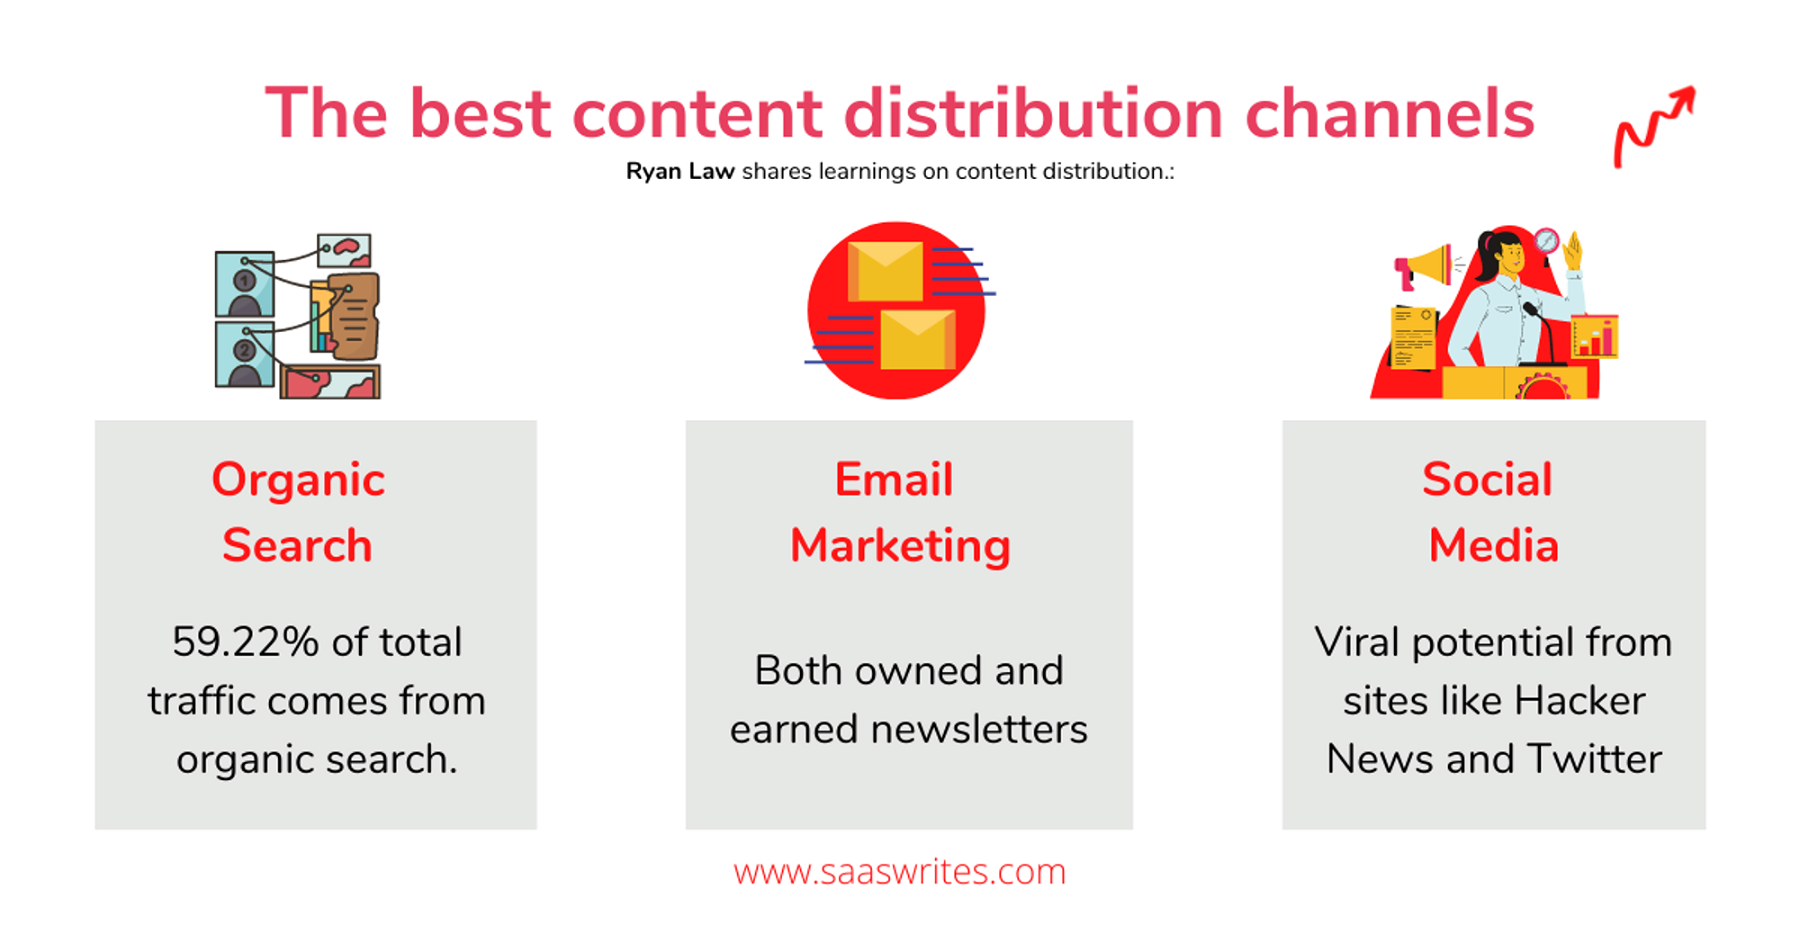 The best content distribution channels.